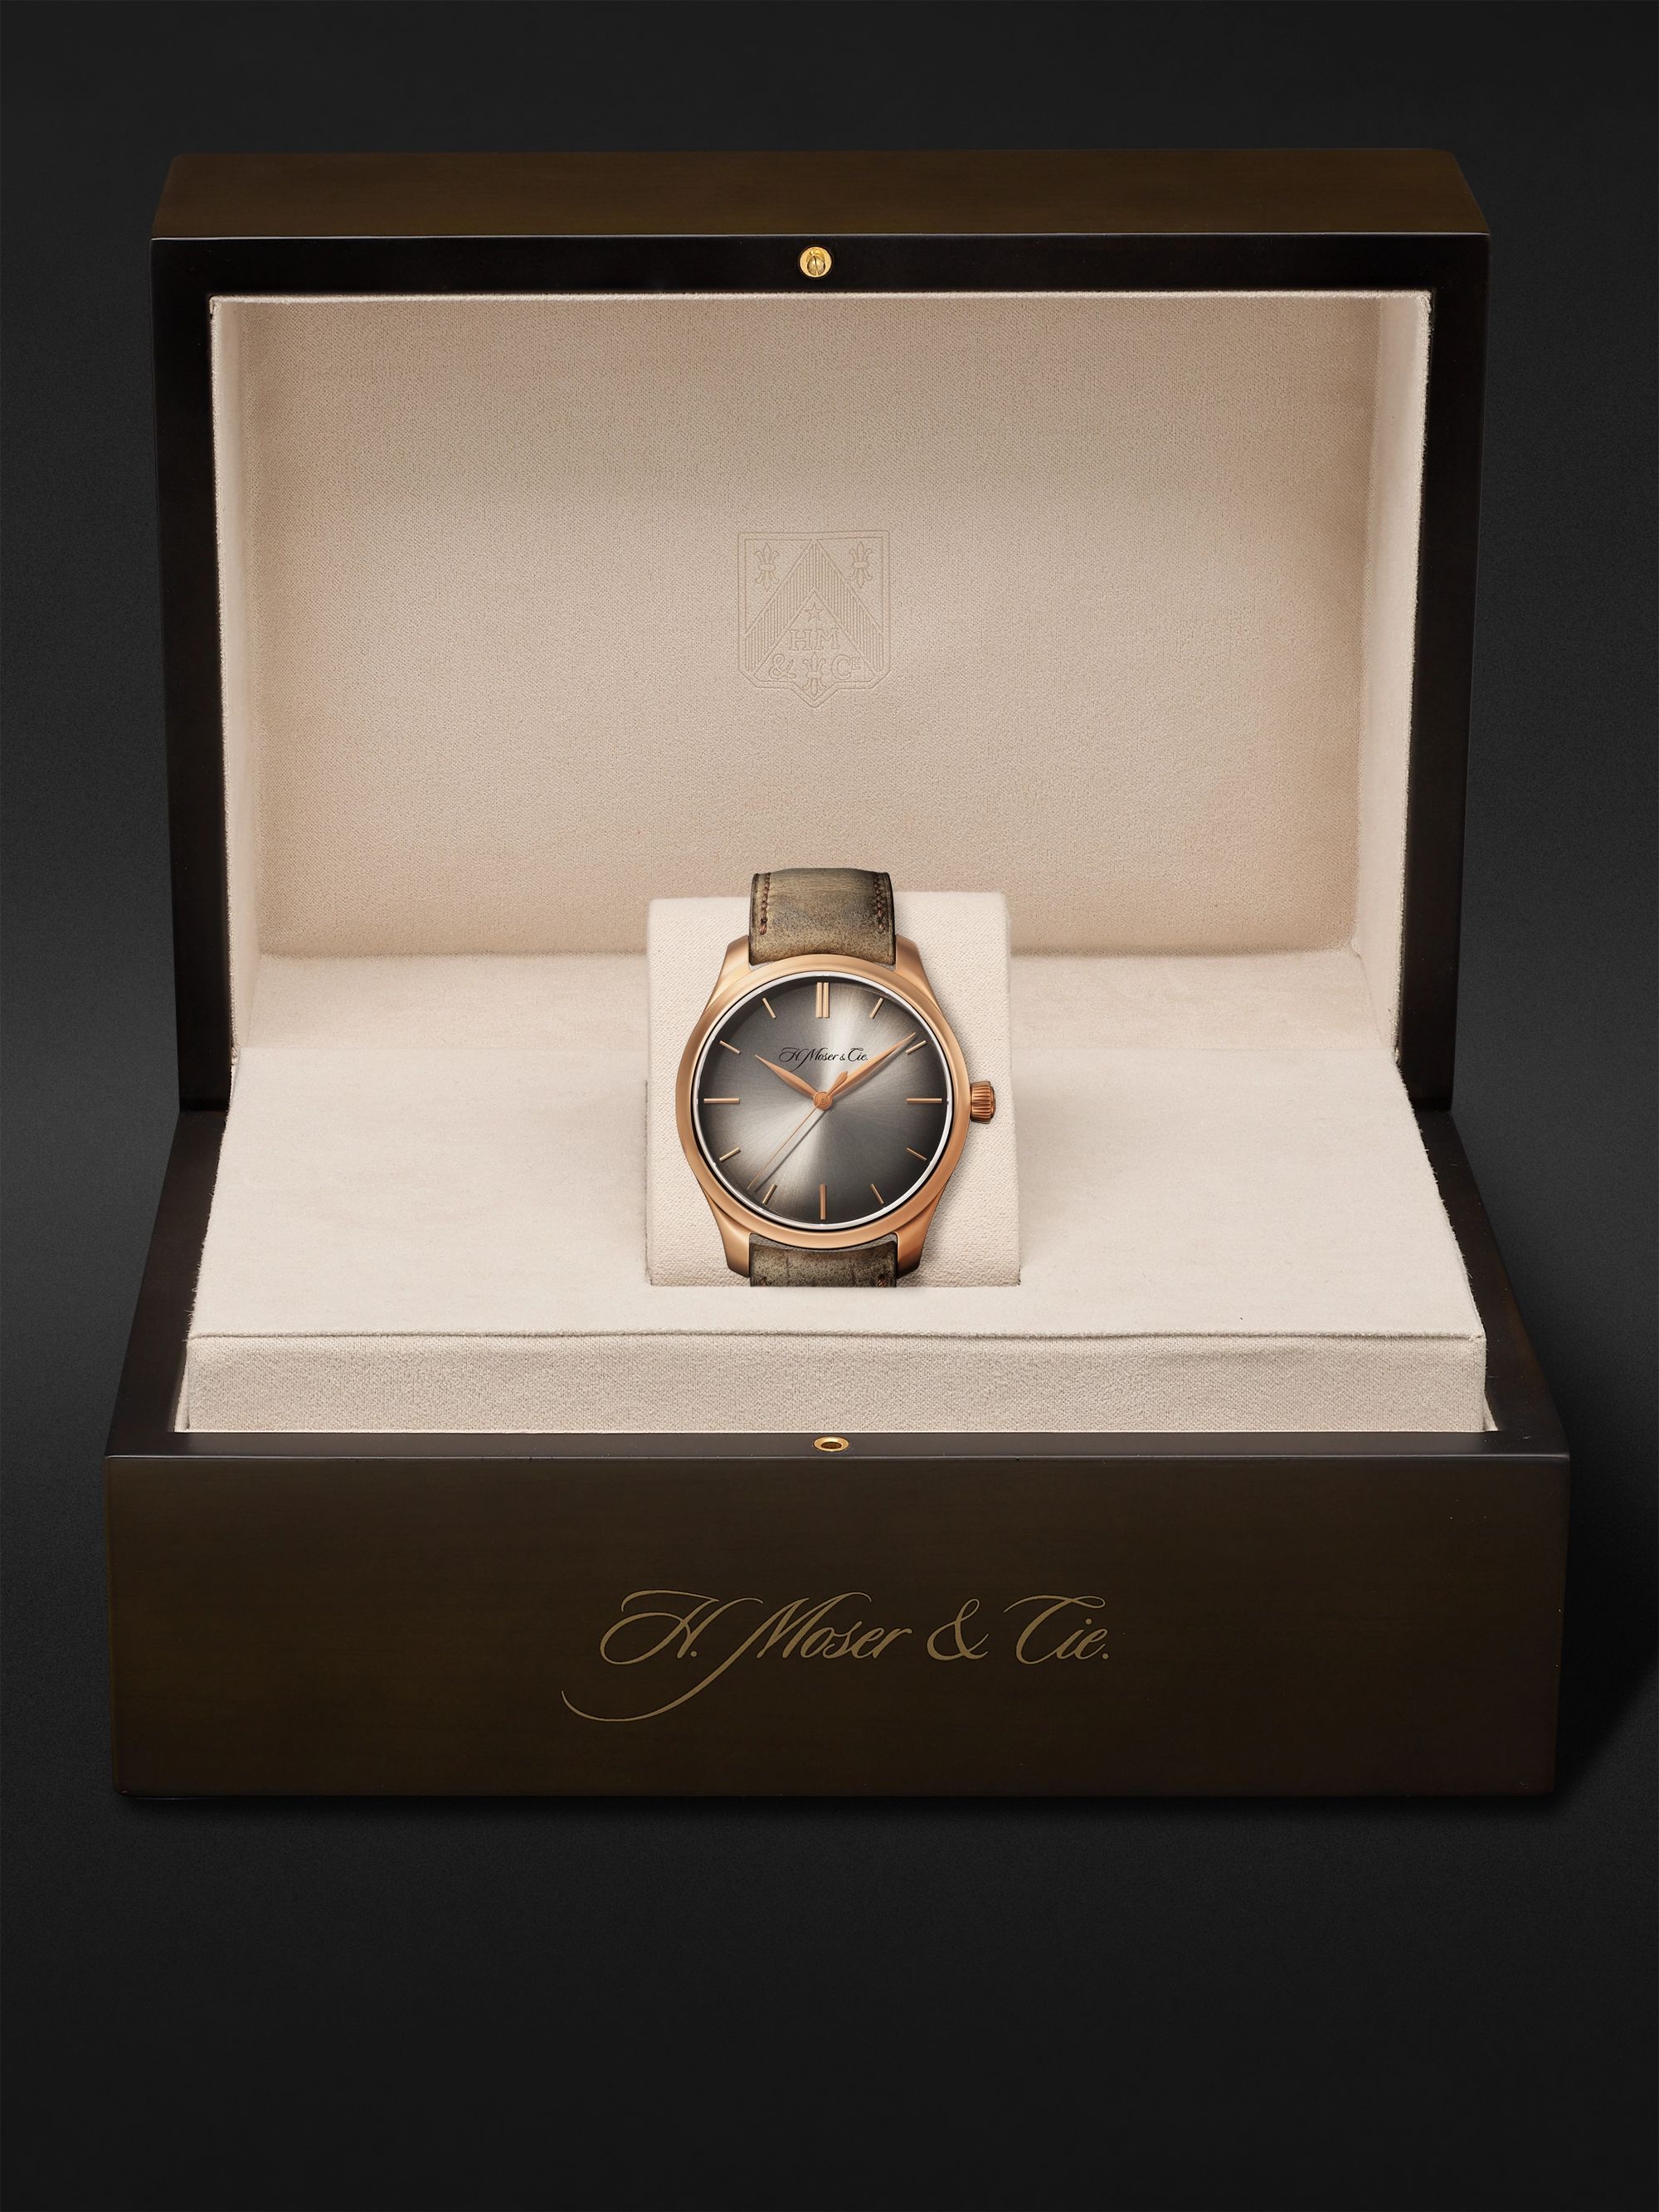 H. MOSER & CIE. Endeavour Perpetual Centre Seconds Automatic 40mm 18-Karat Red Gold and Leather Watch, Ref. No. 1200-0400